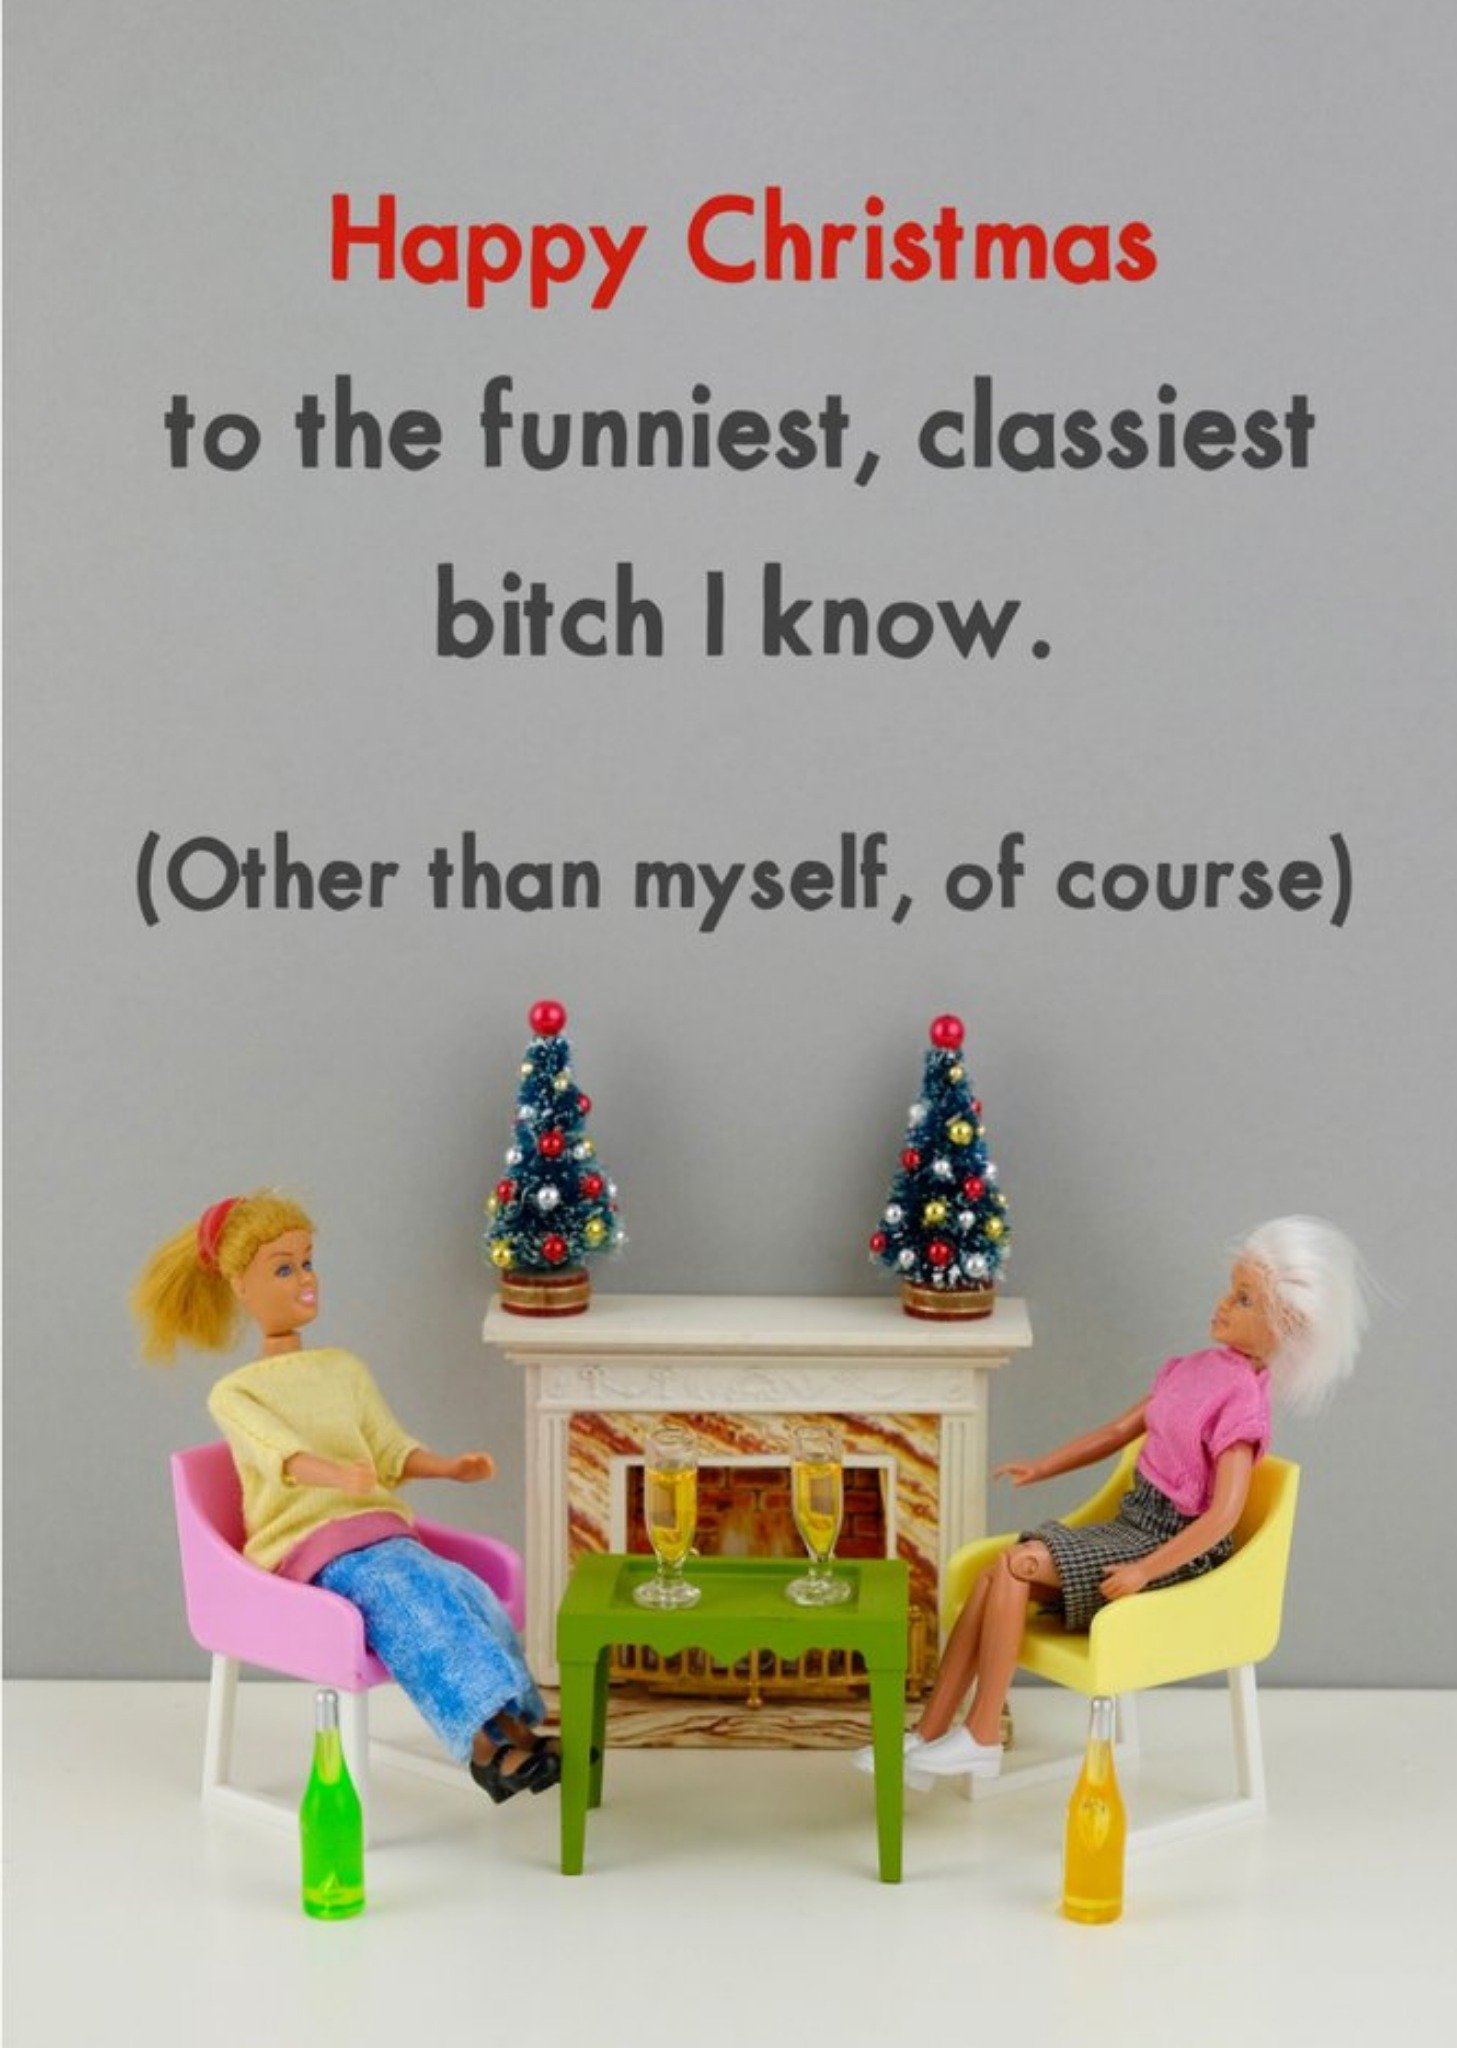 Bold And Bright Funny Dolls Rude Funniest Classiest Christmas Card, Large